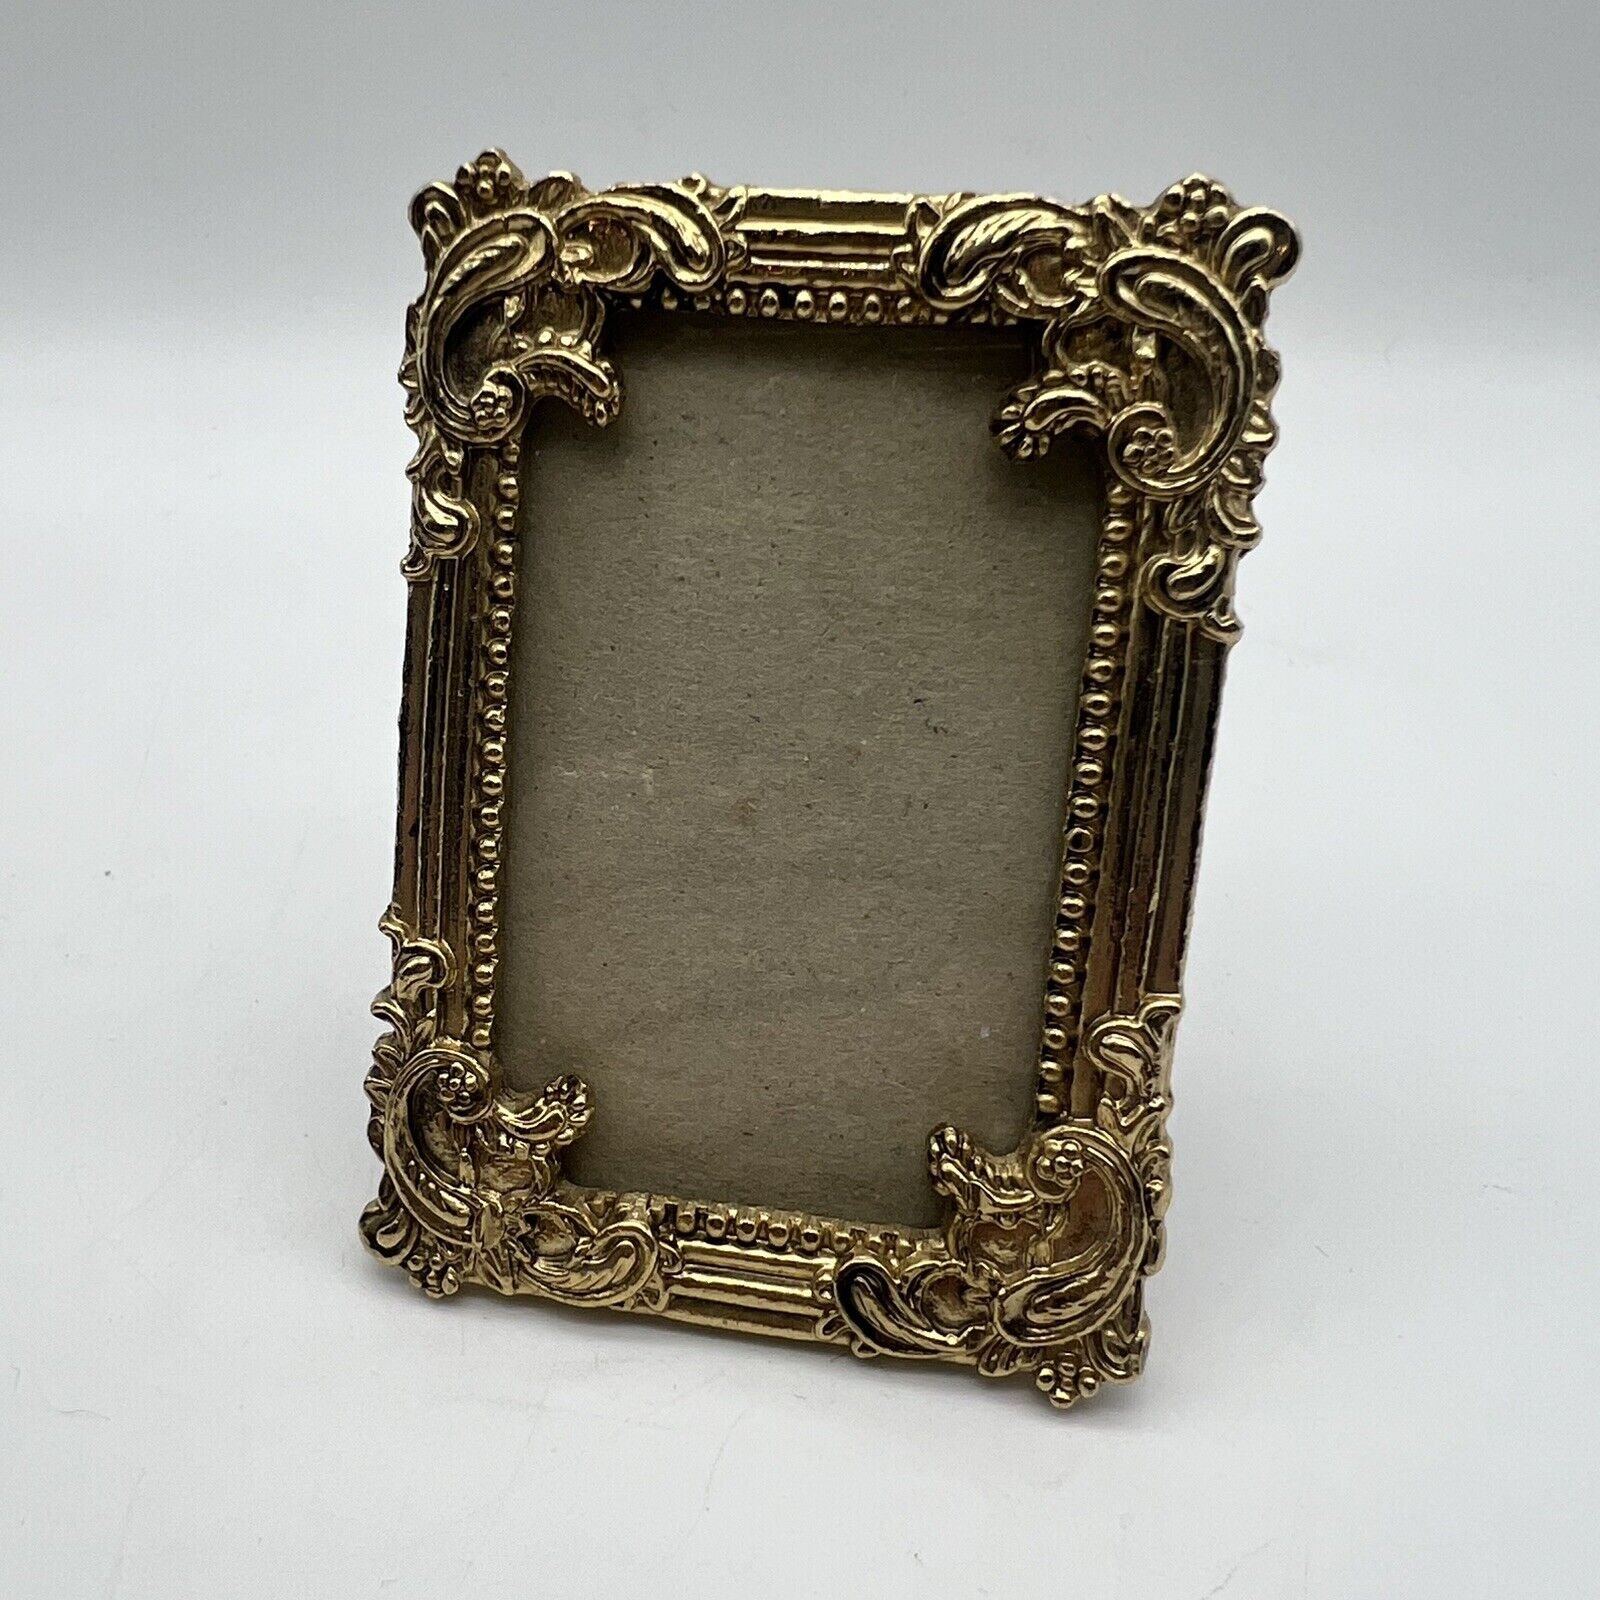 Vintage Metal Small Mini Picture Frame Sixtress NY London Gold Ornate 3.25”x2.5”